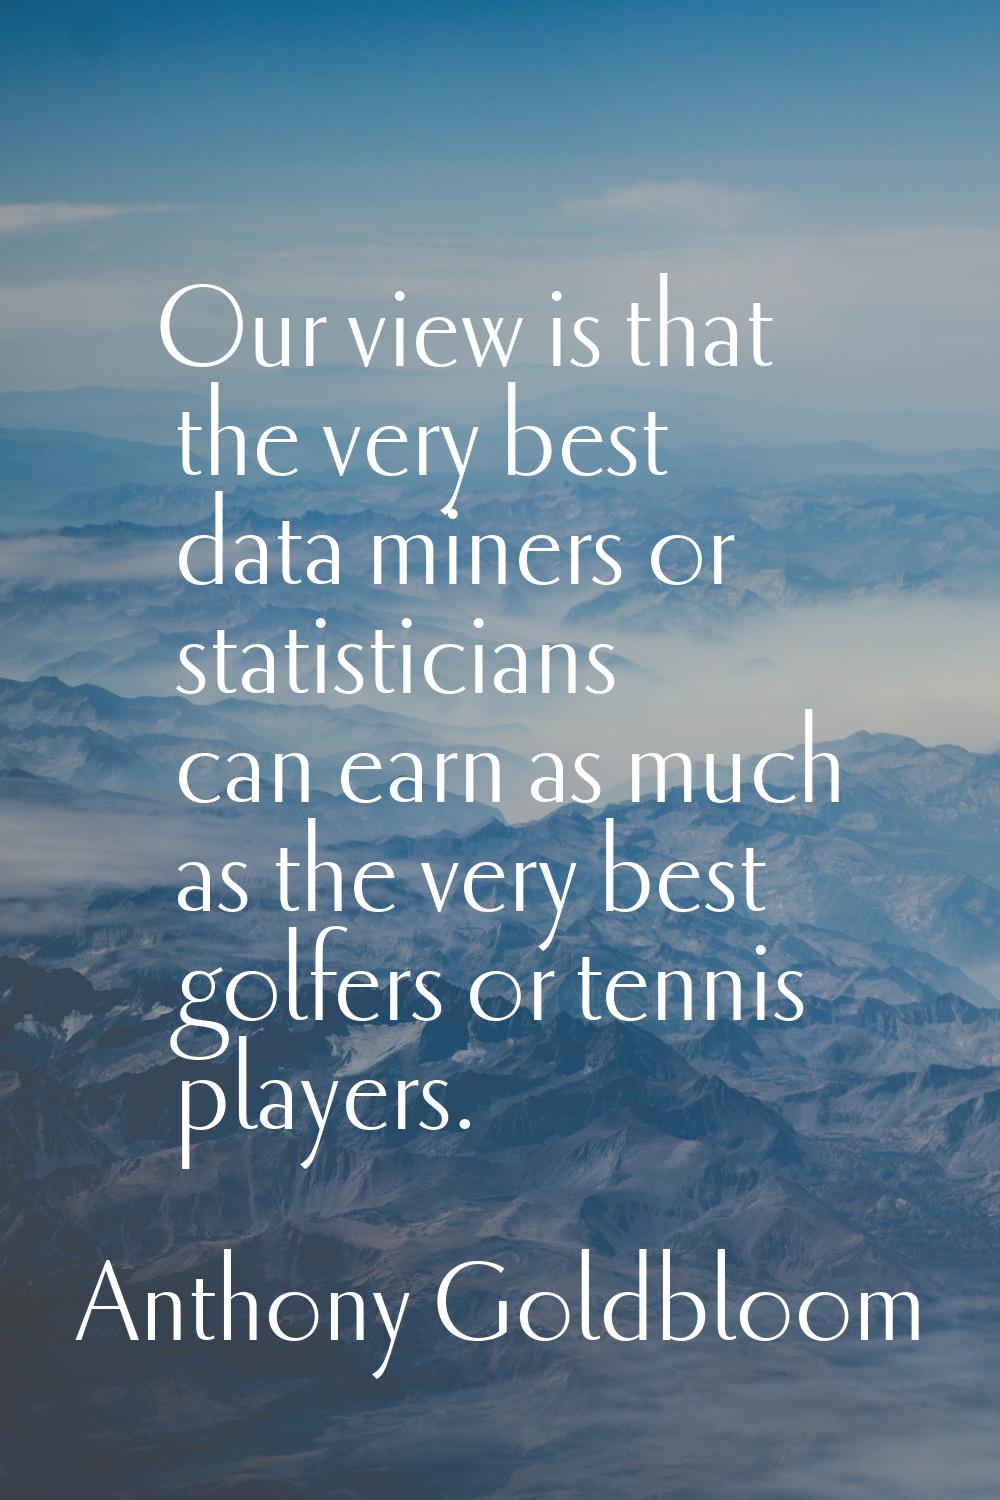 Our view is that the very best data miners or statisticians can earn as much as the very best golfe